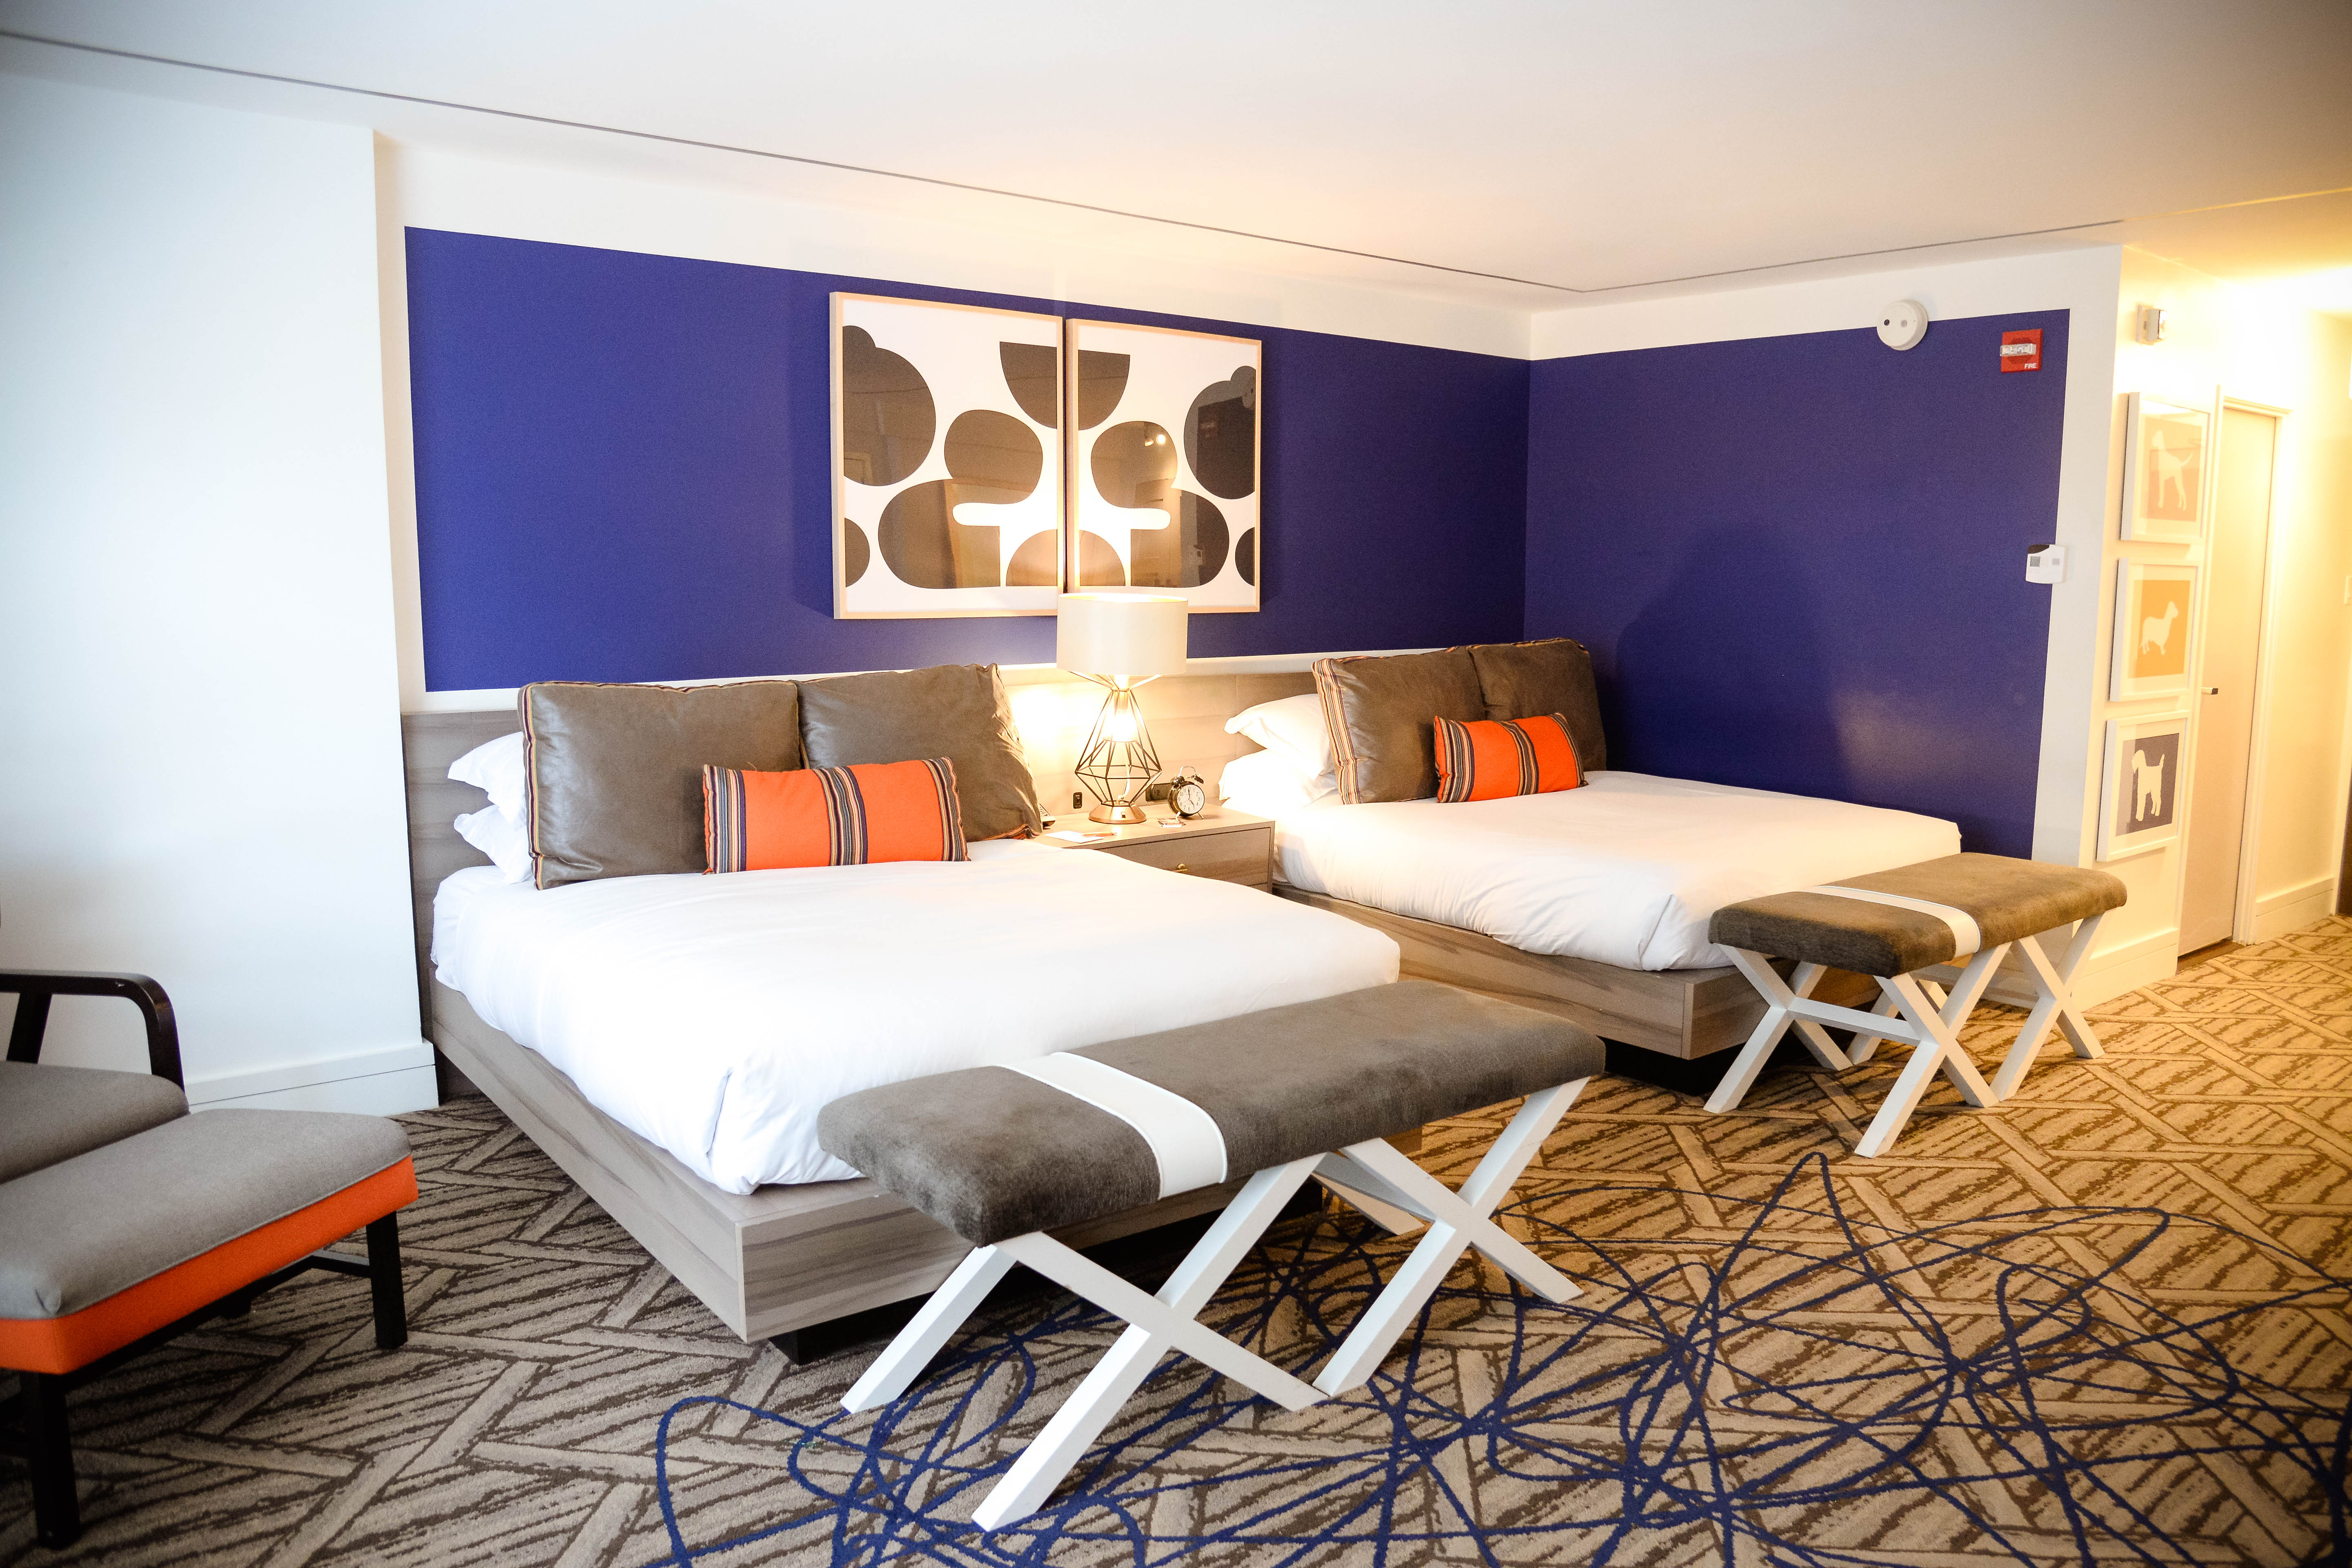 Reasons to stay at the Kimpton Palomar Hotel in DC